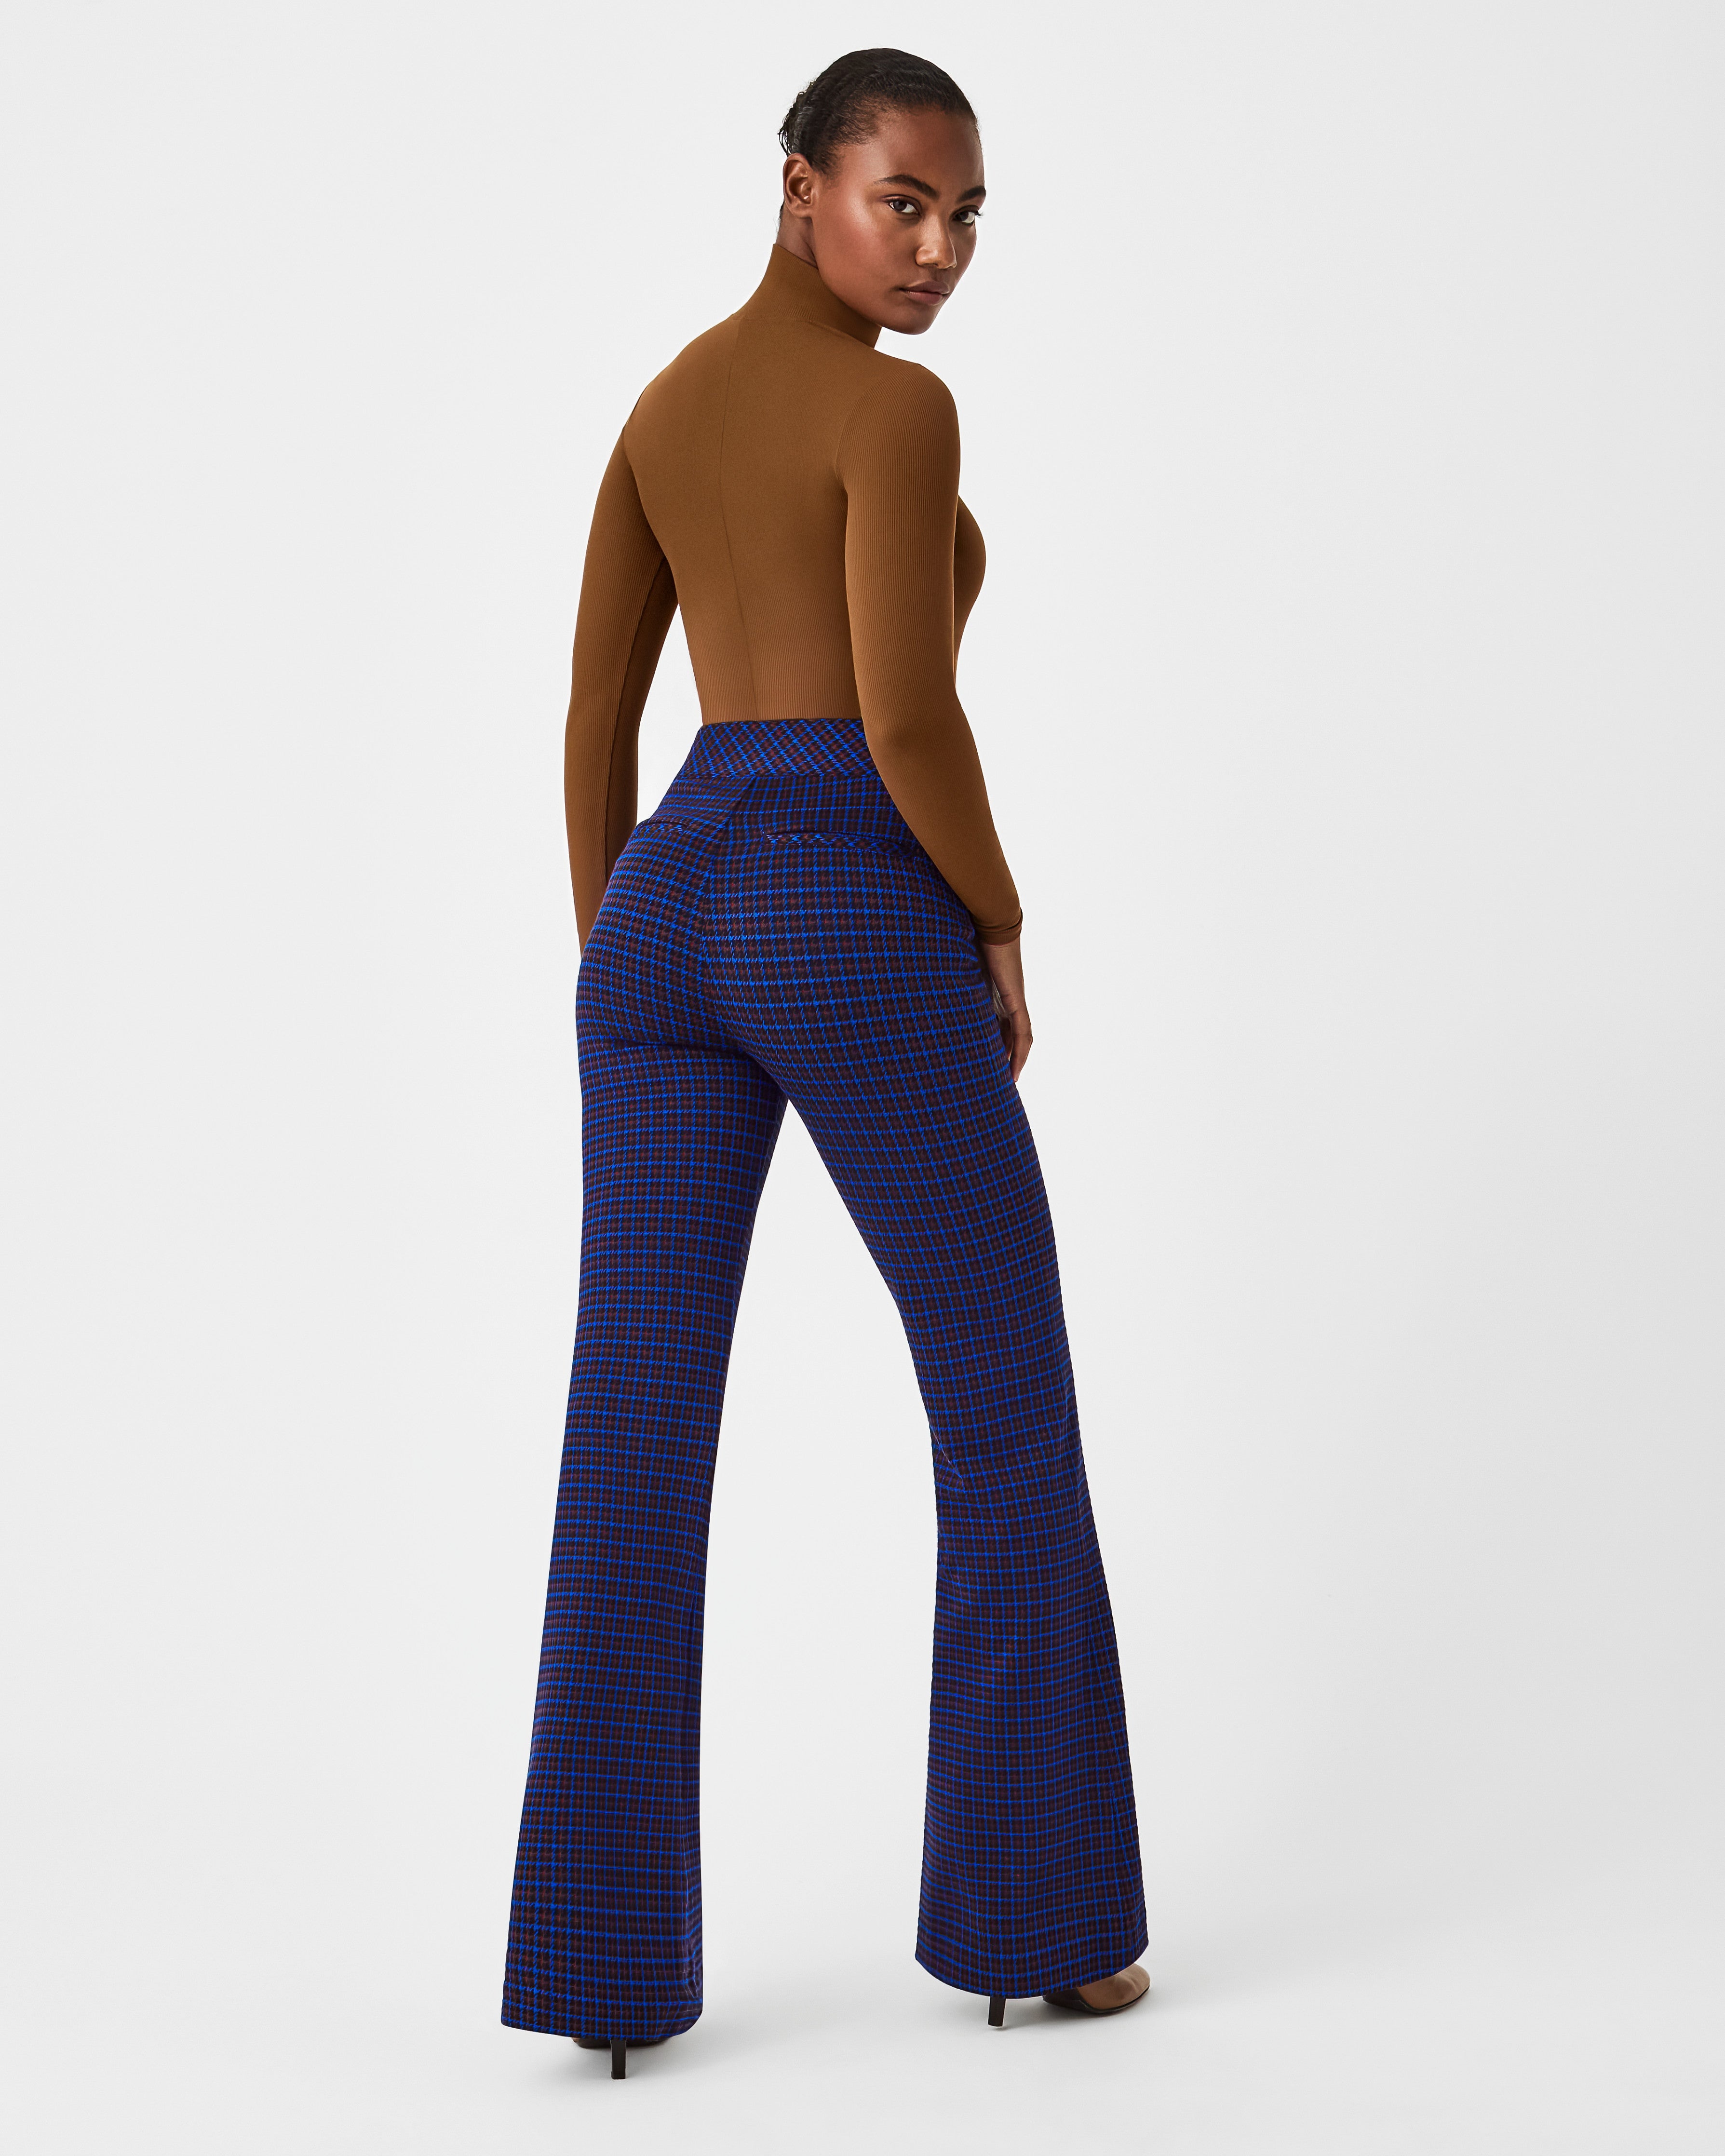 SPANX - WORK IT in our Perfect Pant Hi-Rise Flare! These are the *perfect*  pants to take you from morning meetings to happy hour! #perfectpant #Spanx  #workwear Shop the Perfect Pant Hi-Rise